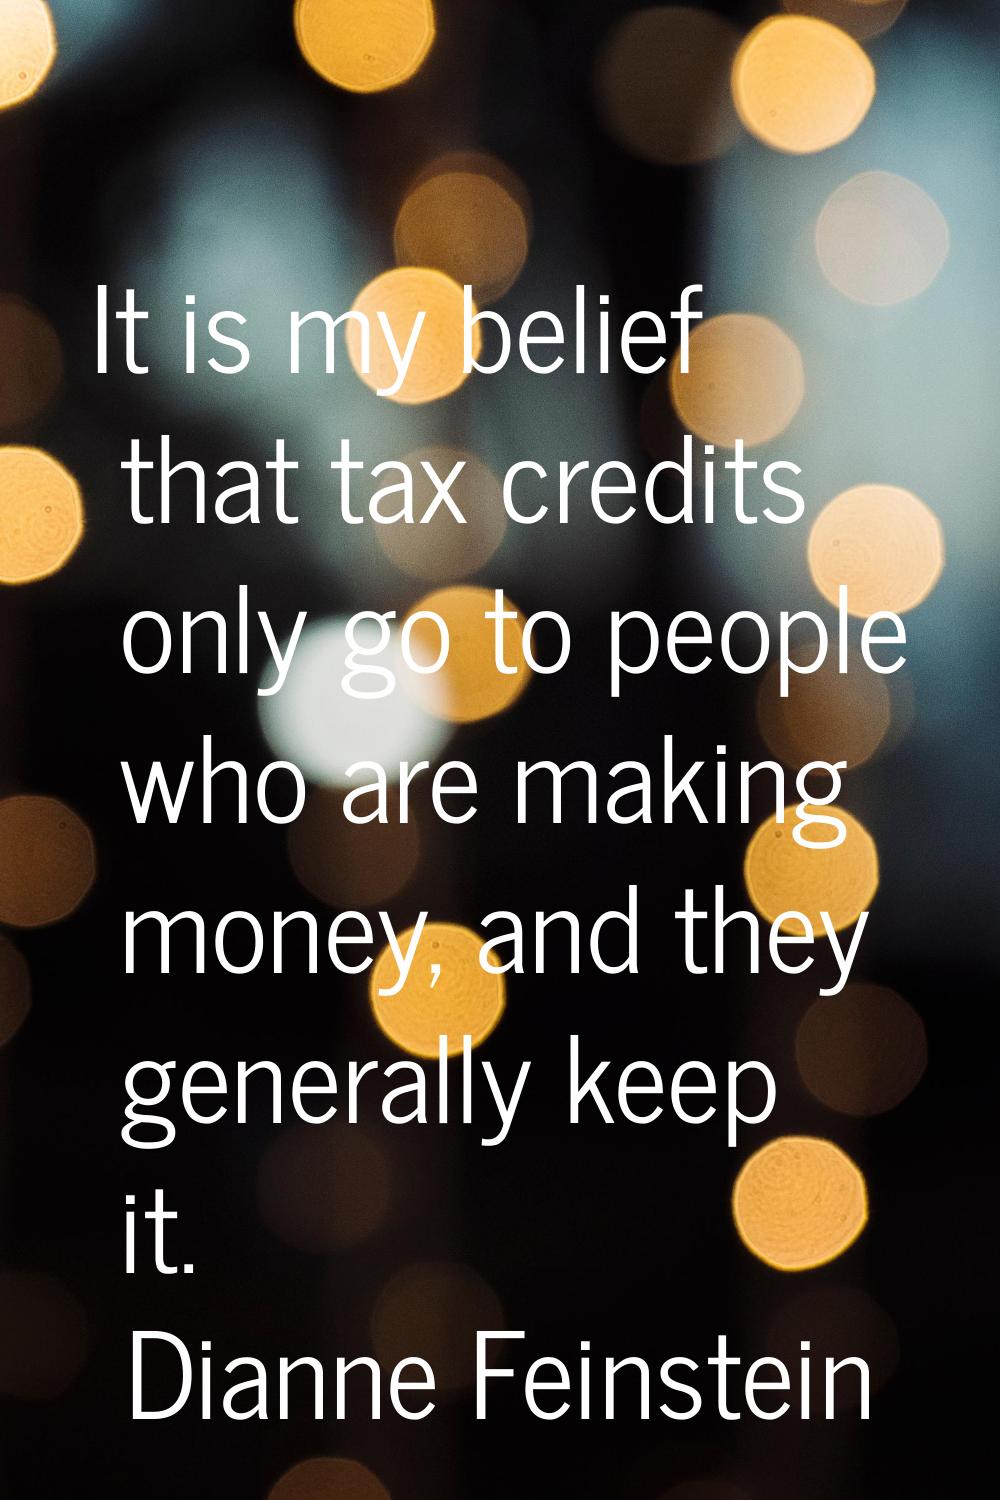 It is my belief that tax credits only go to people who are making money, and they generally keep it